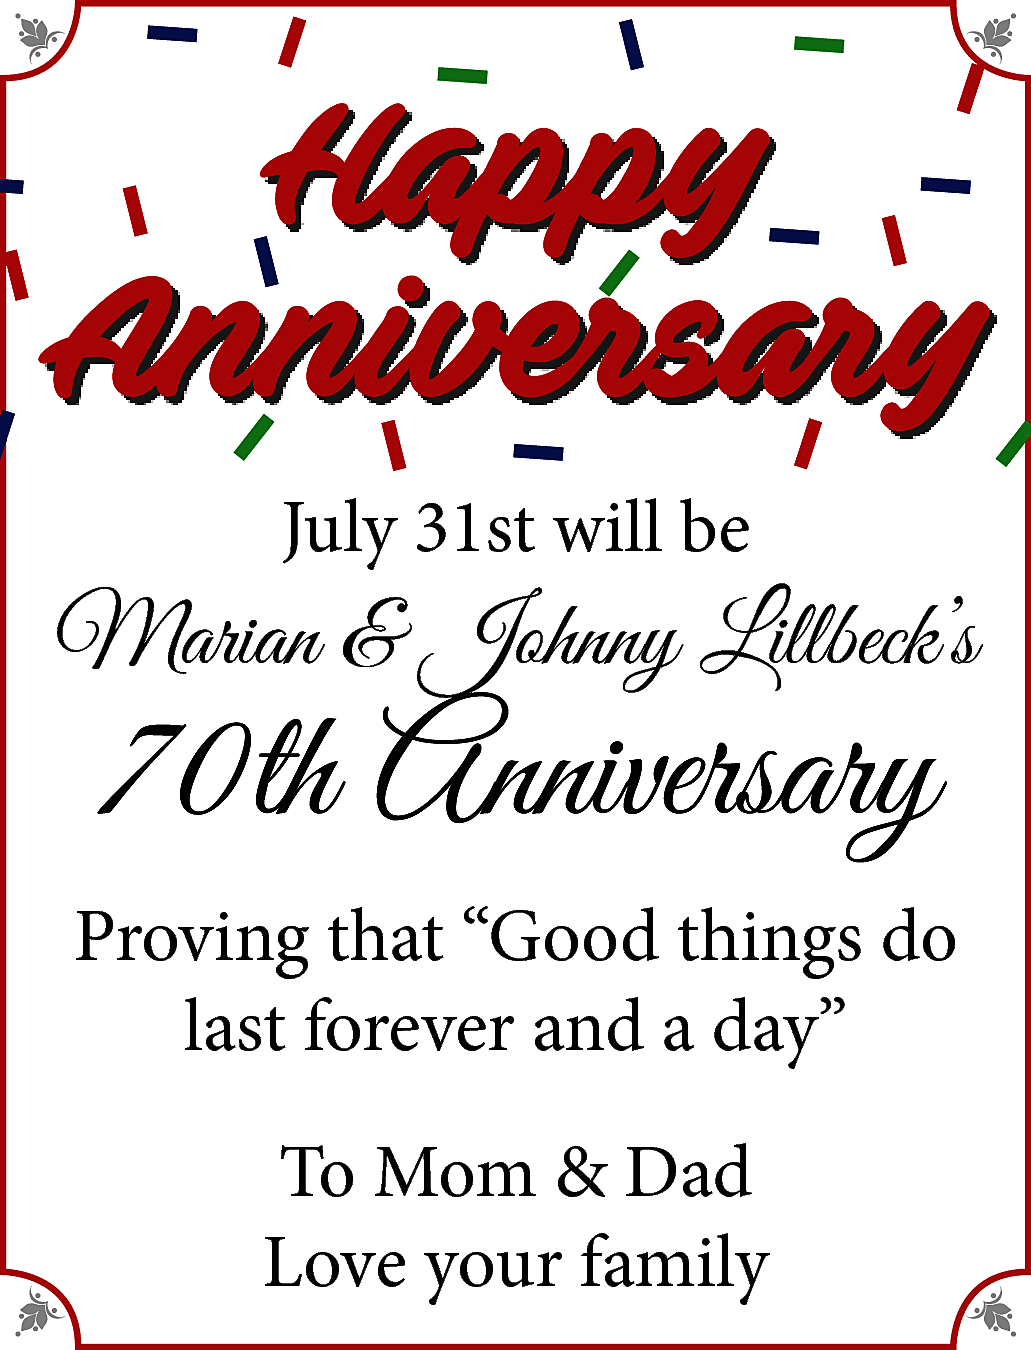 Happy <br>Anniversary <br>July 31st will  Happy  Anniversary  July 31st will be    Marian & Johnny Lillbeck’s    70th Anniversary    Proving that “Good things do  last forever and a day”  To Mom & Dad  Love your family    